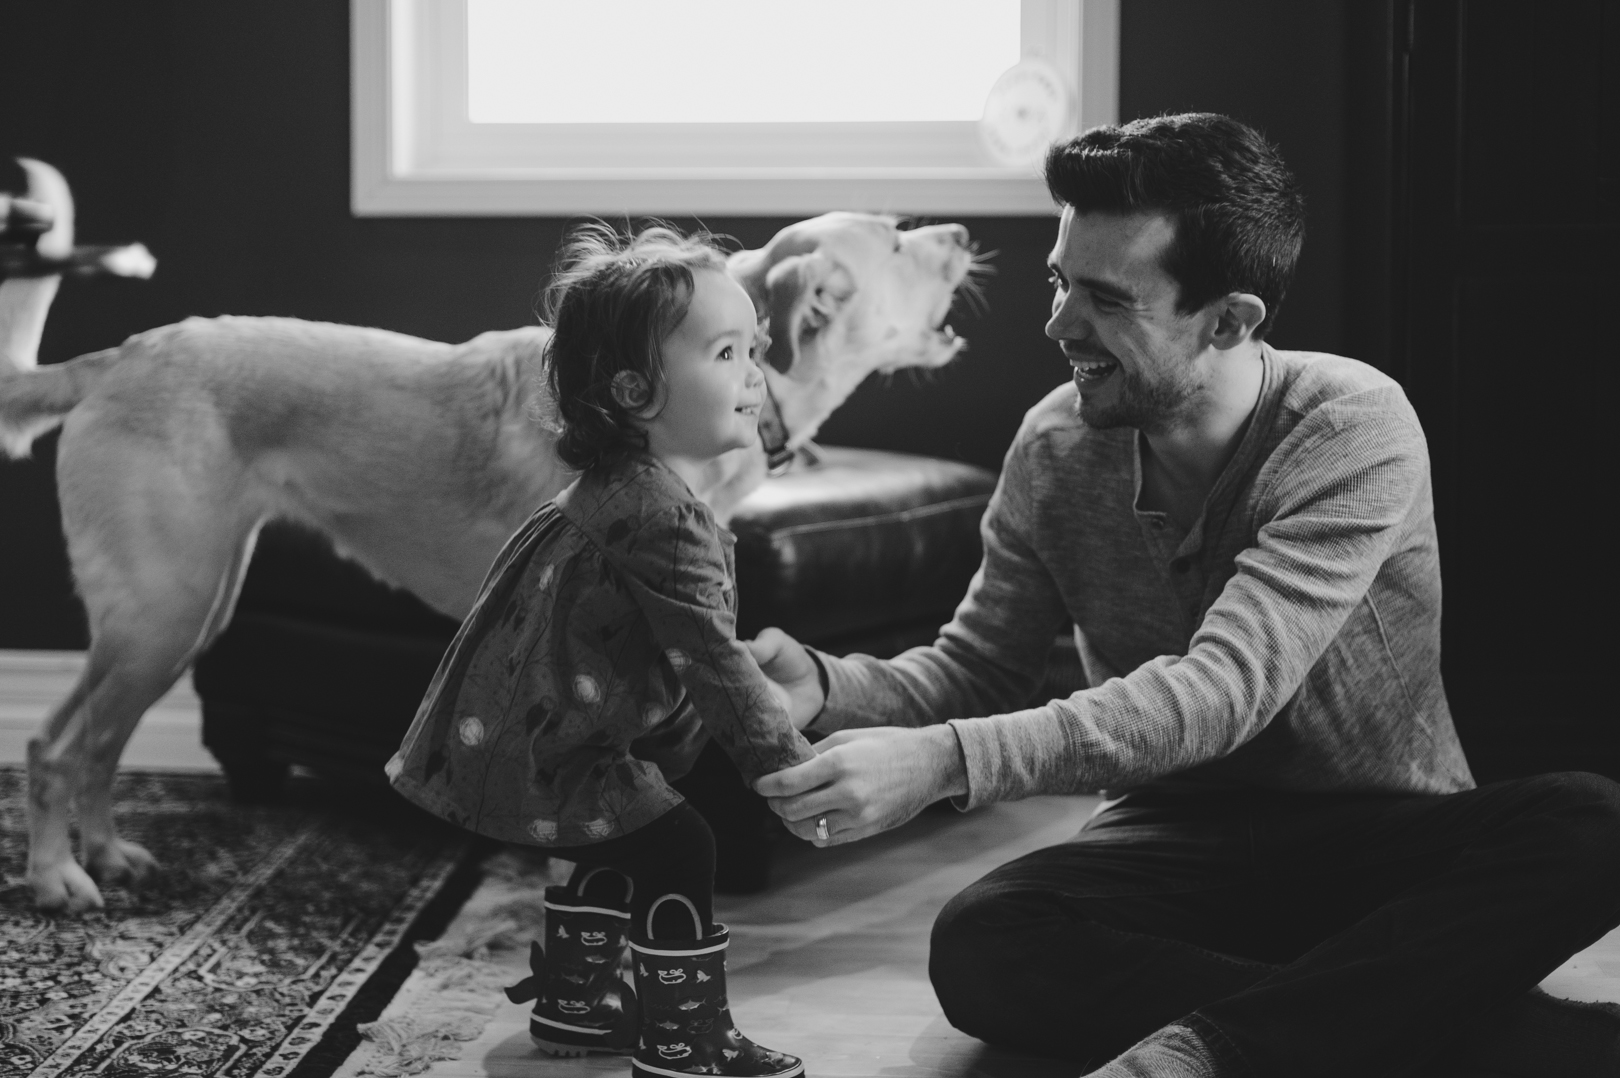 dad and daughter laughing together on Saturday morning. Dad and daughter playing together on Saturday morning. Photo by Ashley Notley Photography.